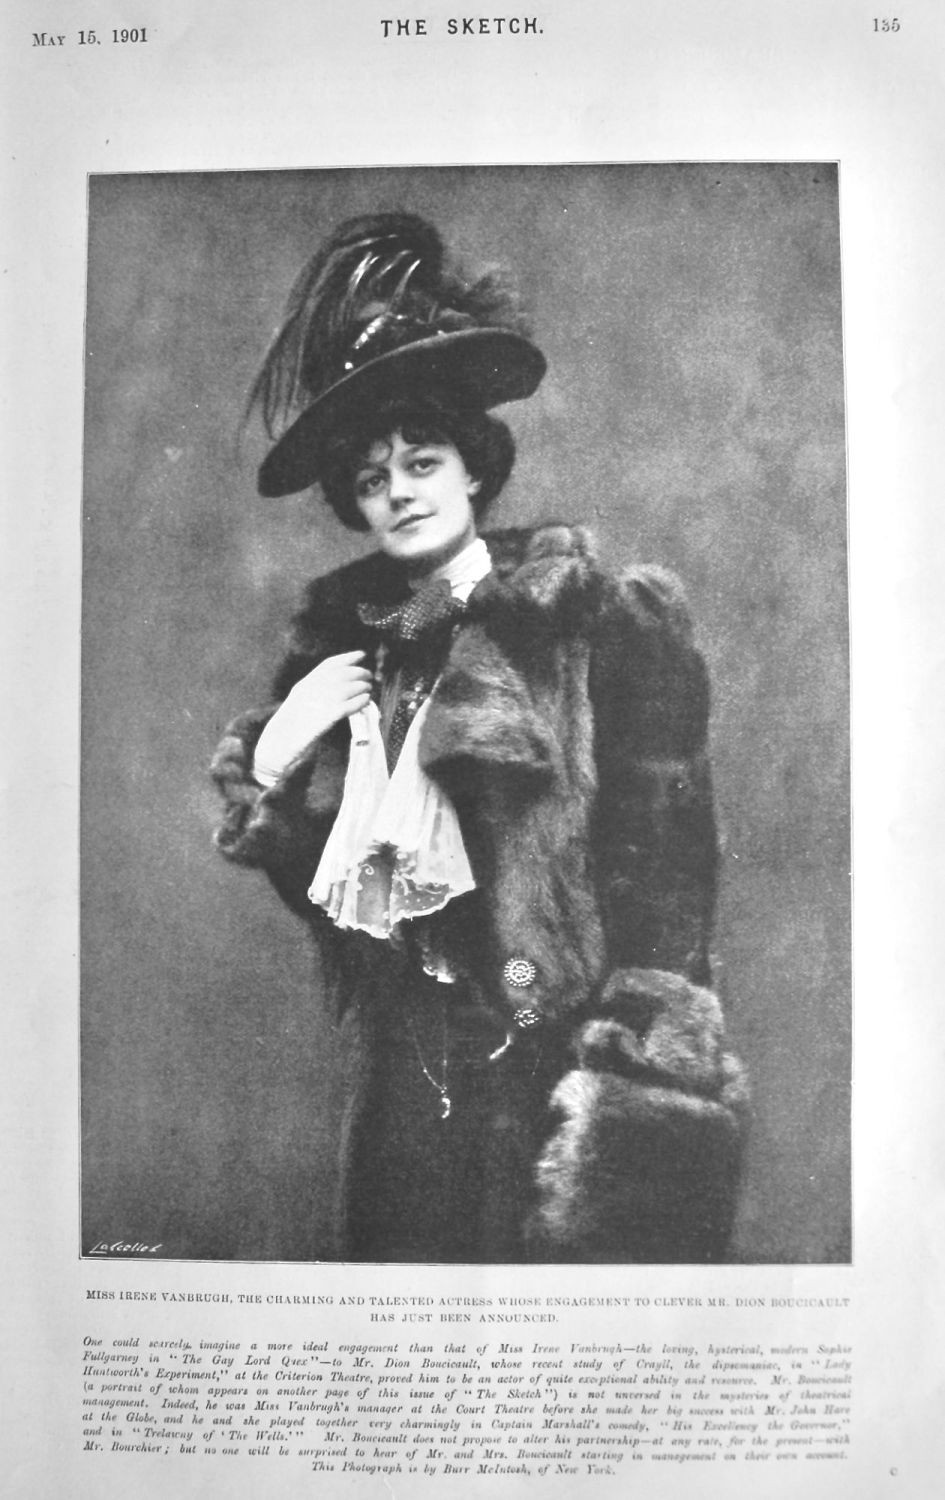 Miss Irene Vanbrugh, the Charming and Talented Actress whose Engagement to 